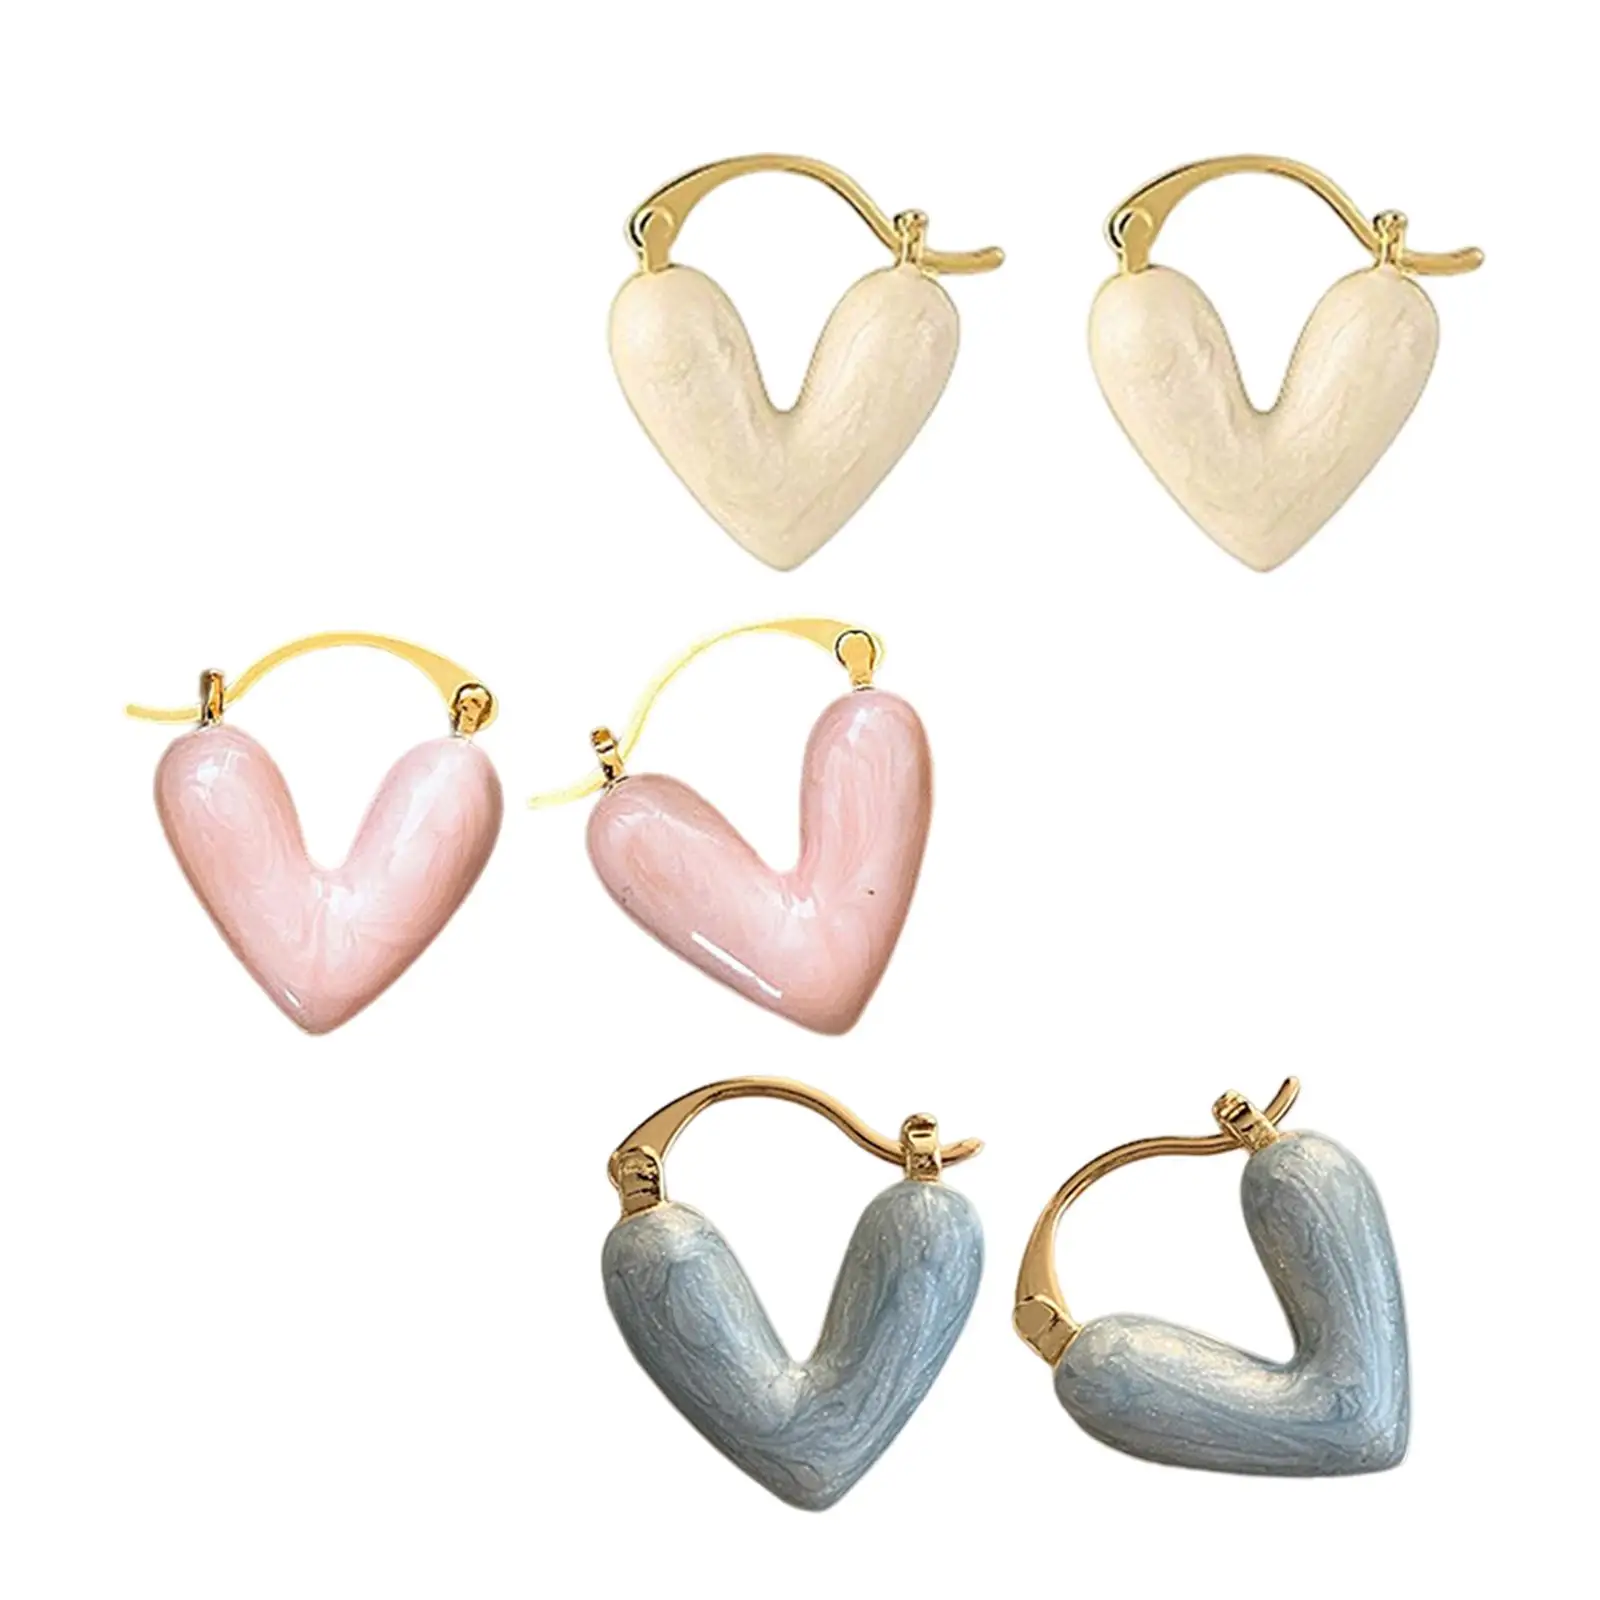 Women Earring Stud Heart Shaped Drop Earrings Jewelry Cool for Formal Suit, Casual Clothing or Evening Dress Accessory Elegant